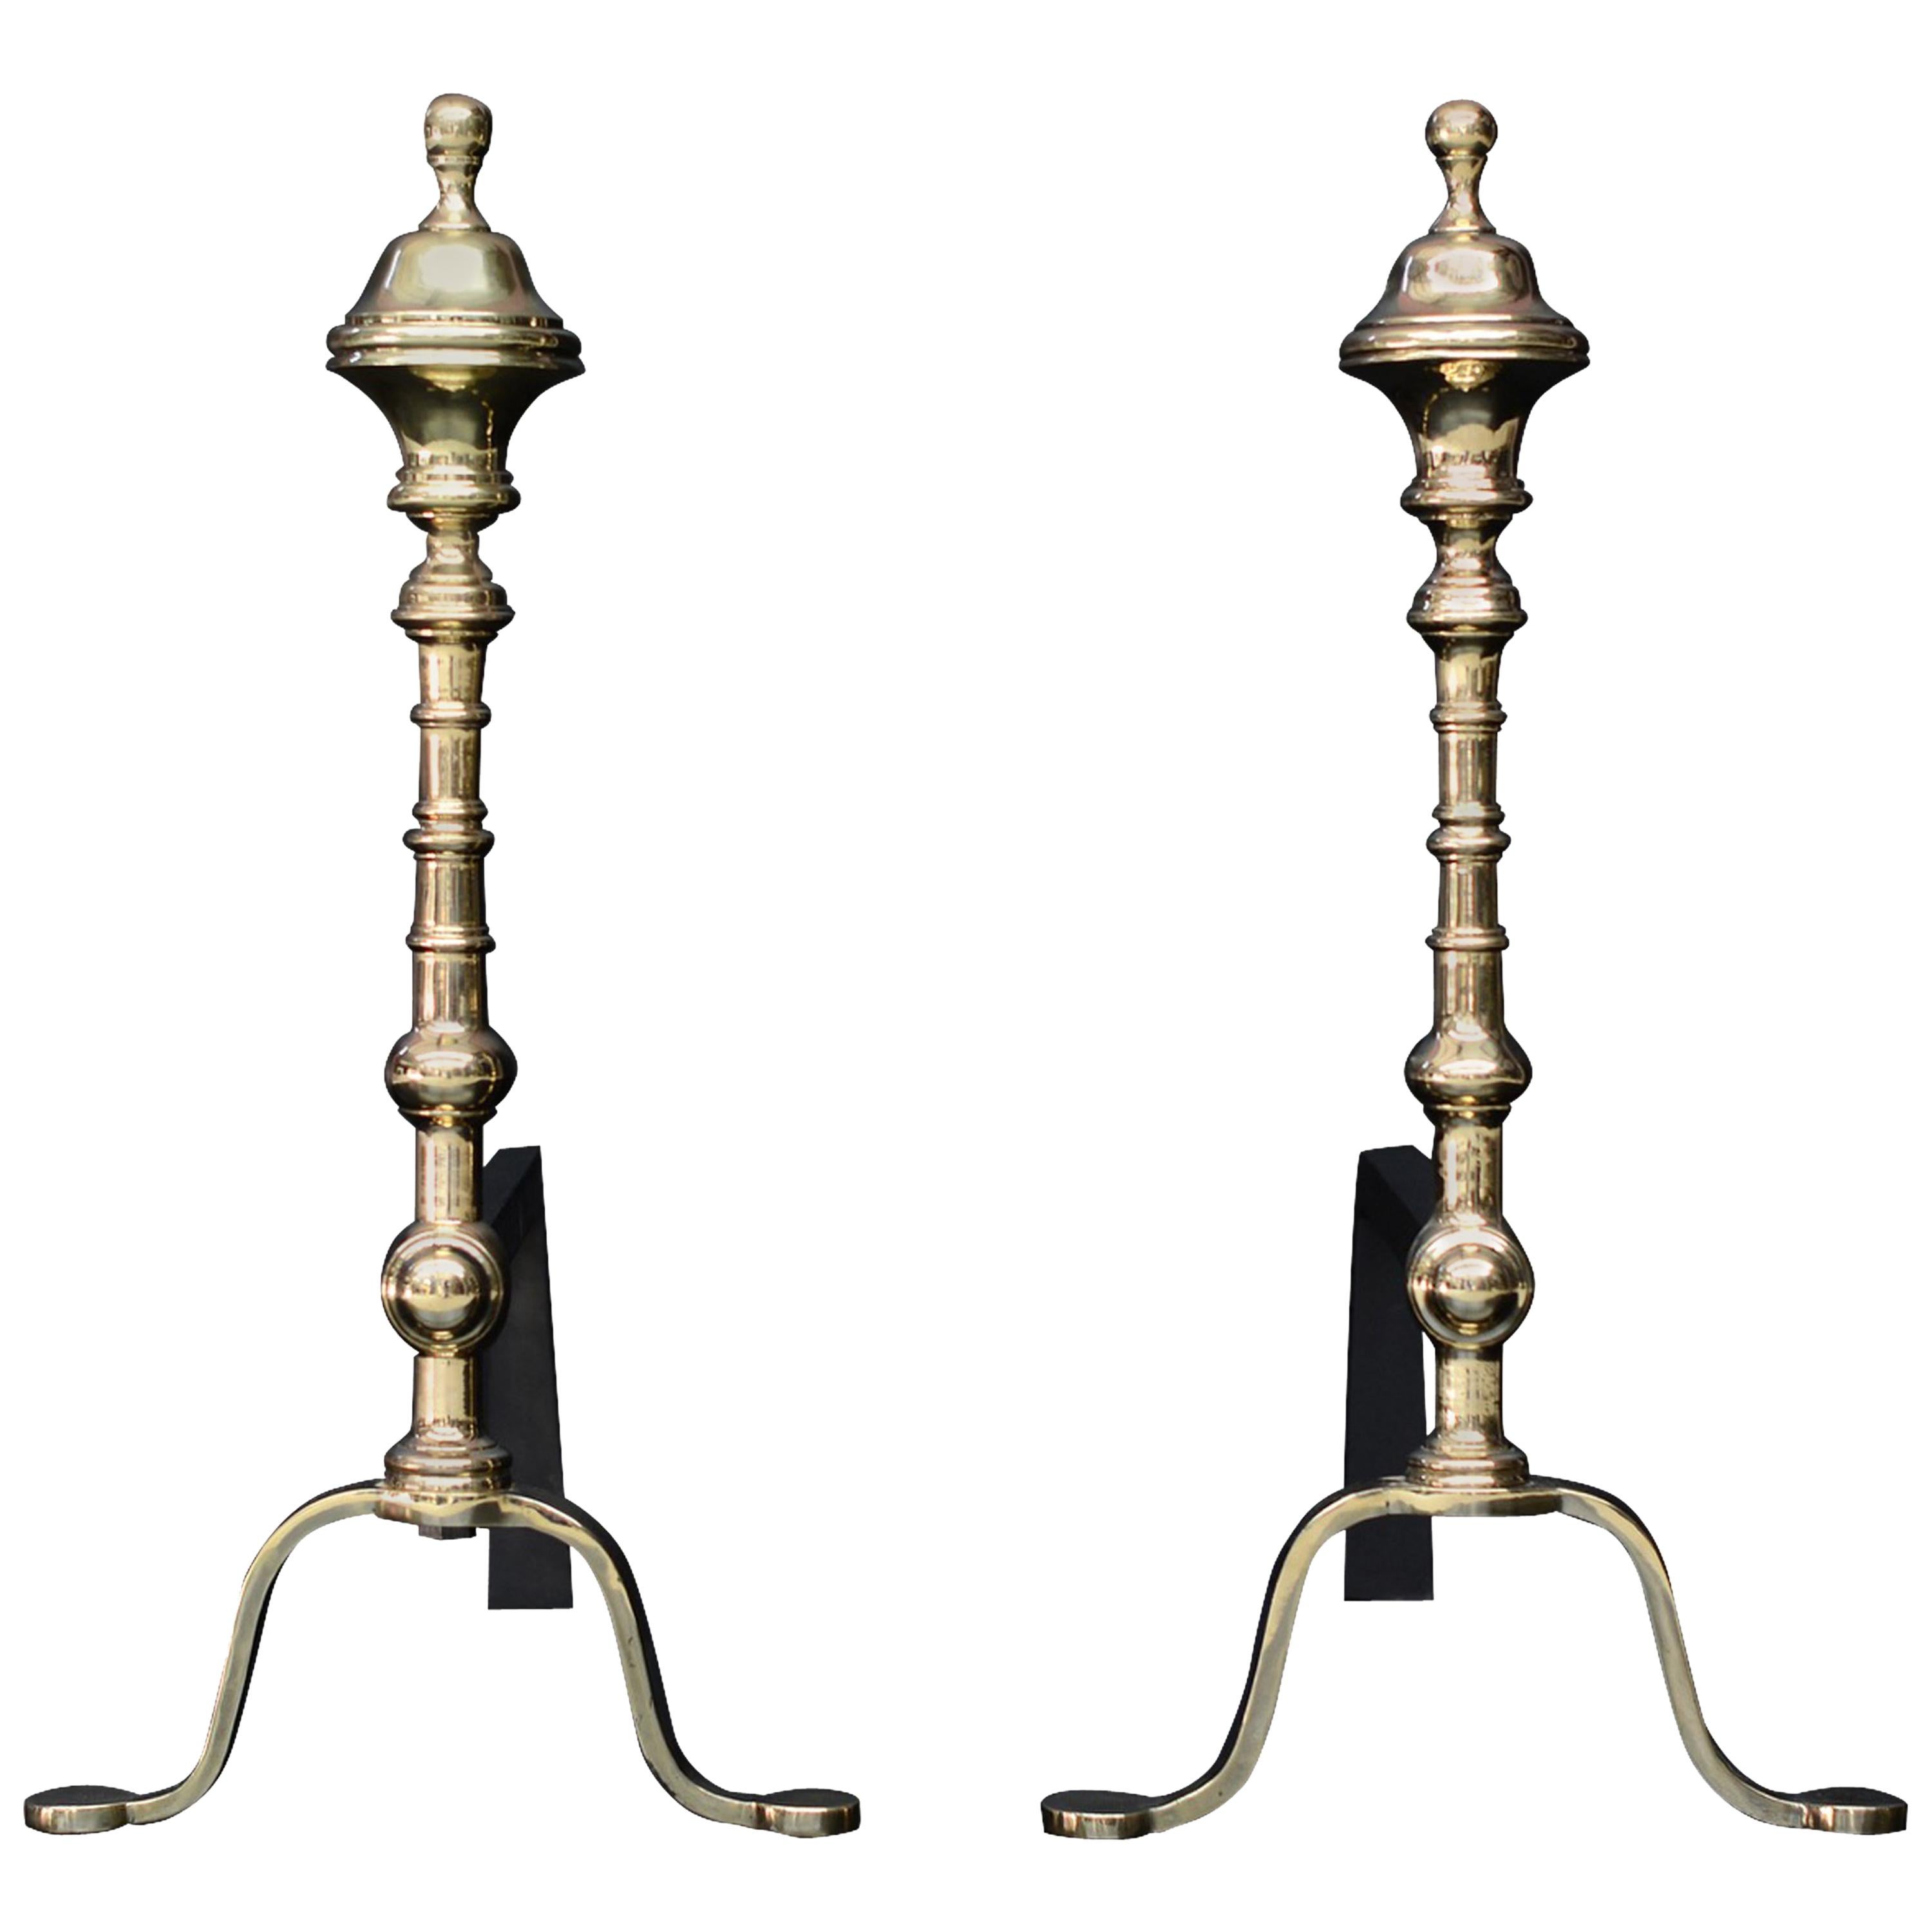 Pair of Elegant Polished Brass Firedogs For Sale